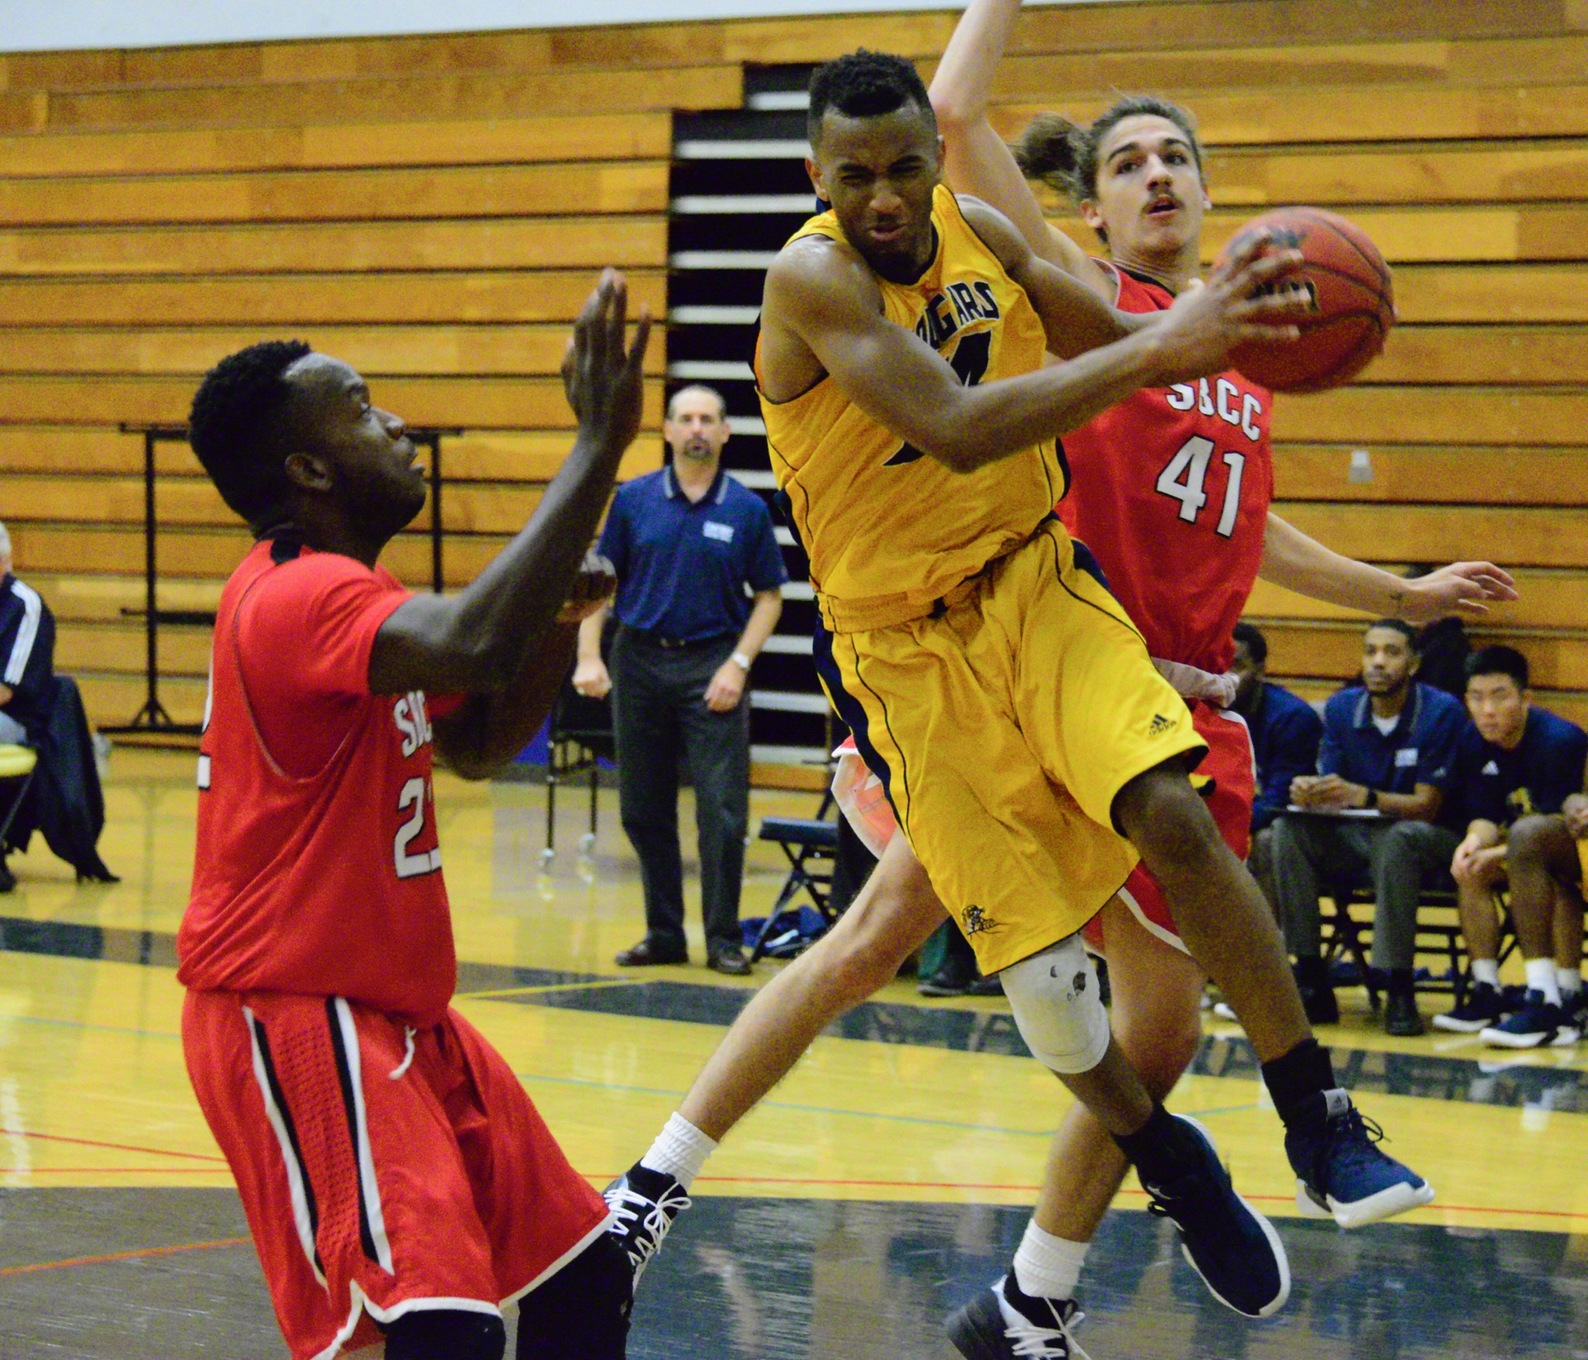 College of the Canyons improved its record to 2-2 with a 96-70 win over Santa Barbara City College at the Cougar Cage. Photo by John Wareham/COC Sports Information